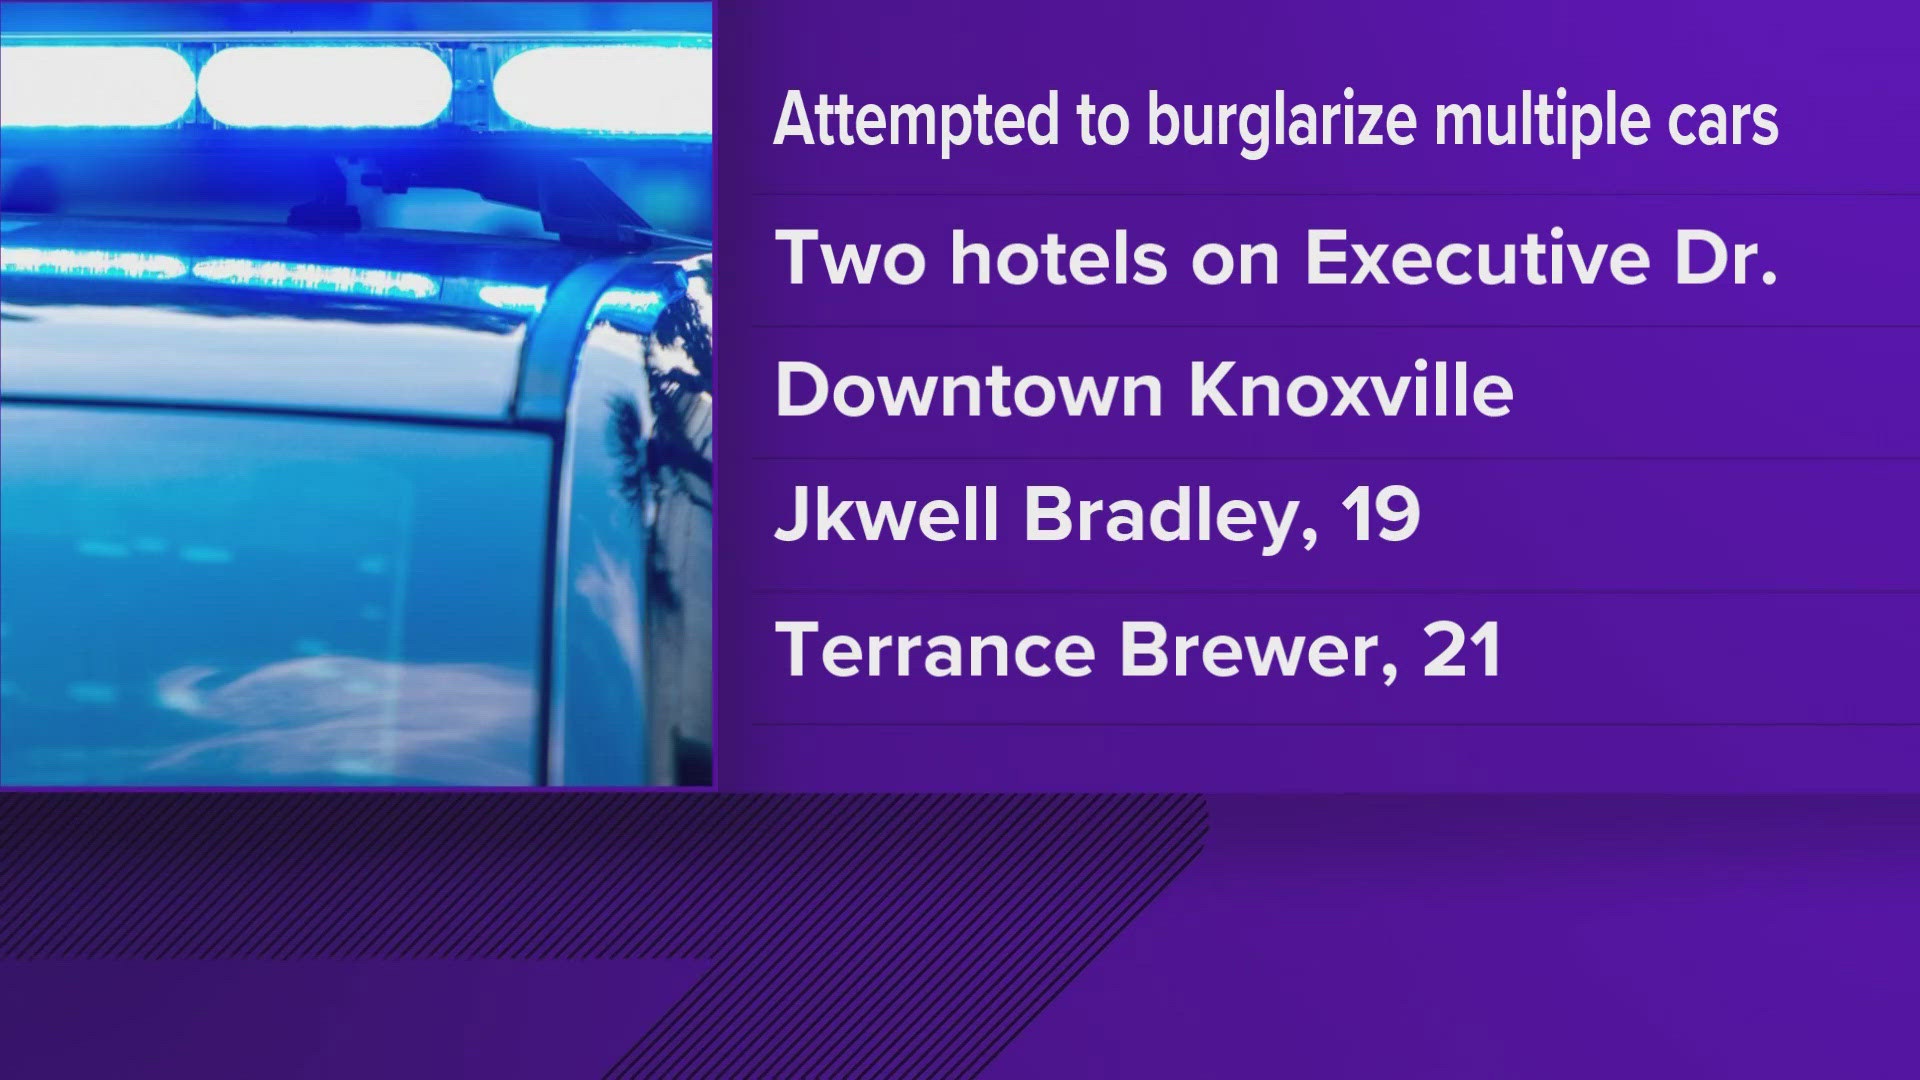 Two suspects from the Chattanooga area were charged with multiple counts of vehicle burglary, the Knoxville Police Department said.